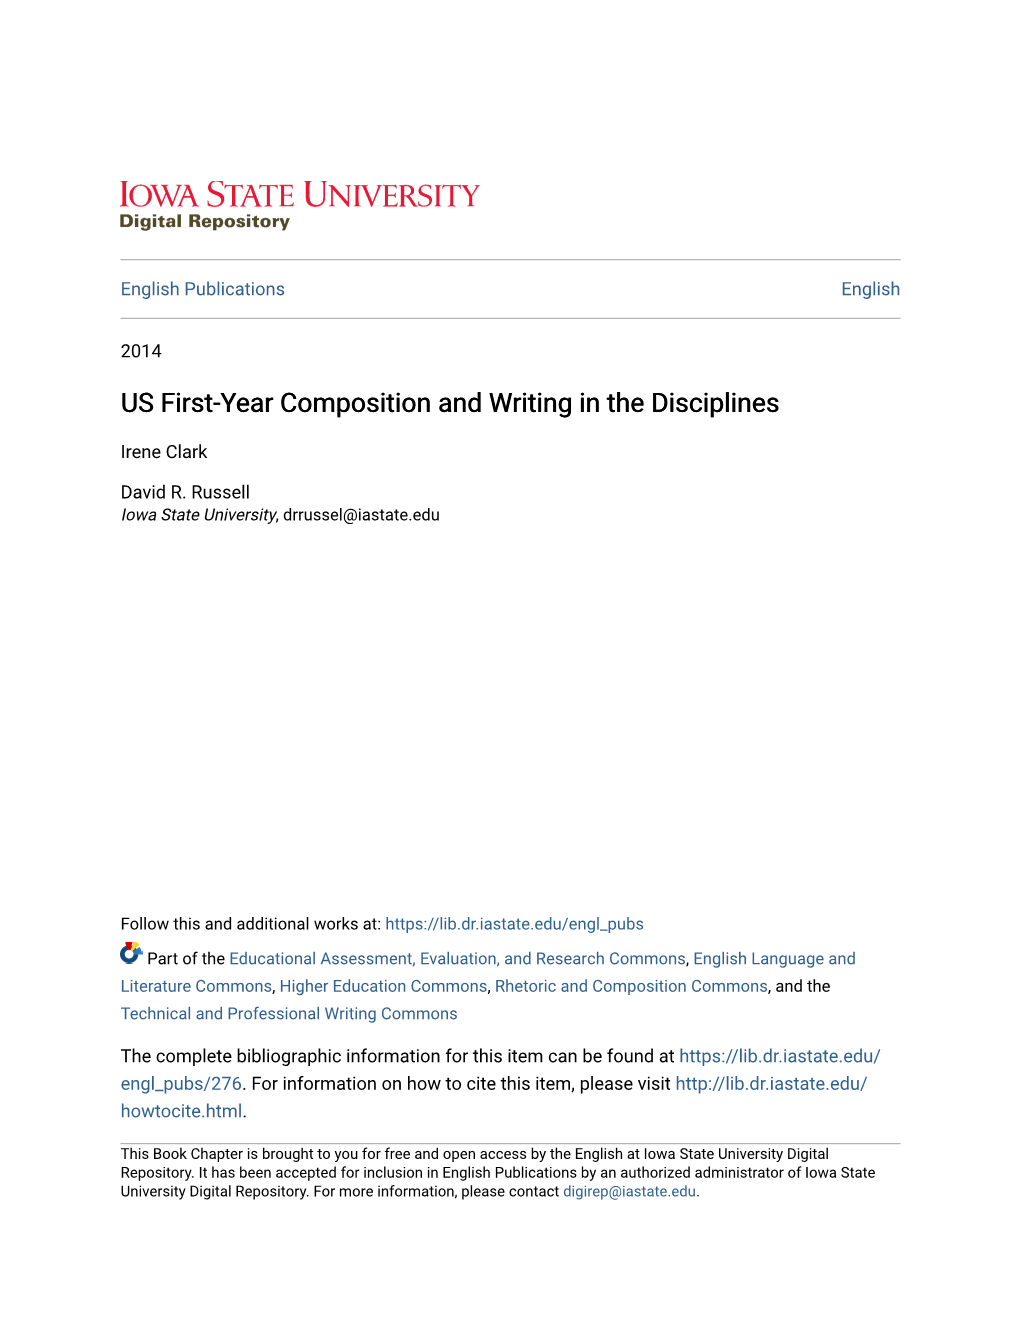 US First-Year Composition and Writing in the Disciplines